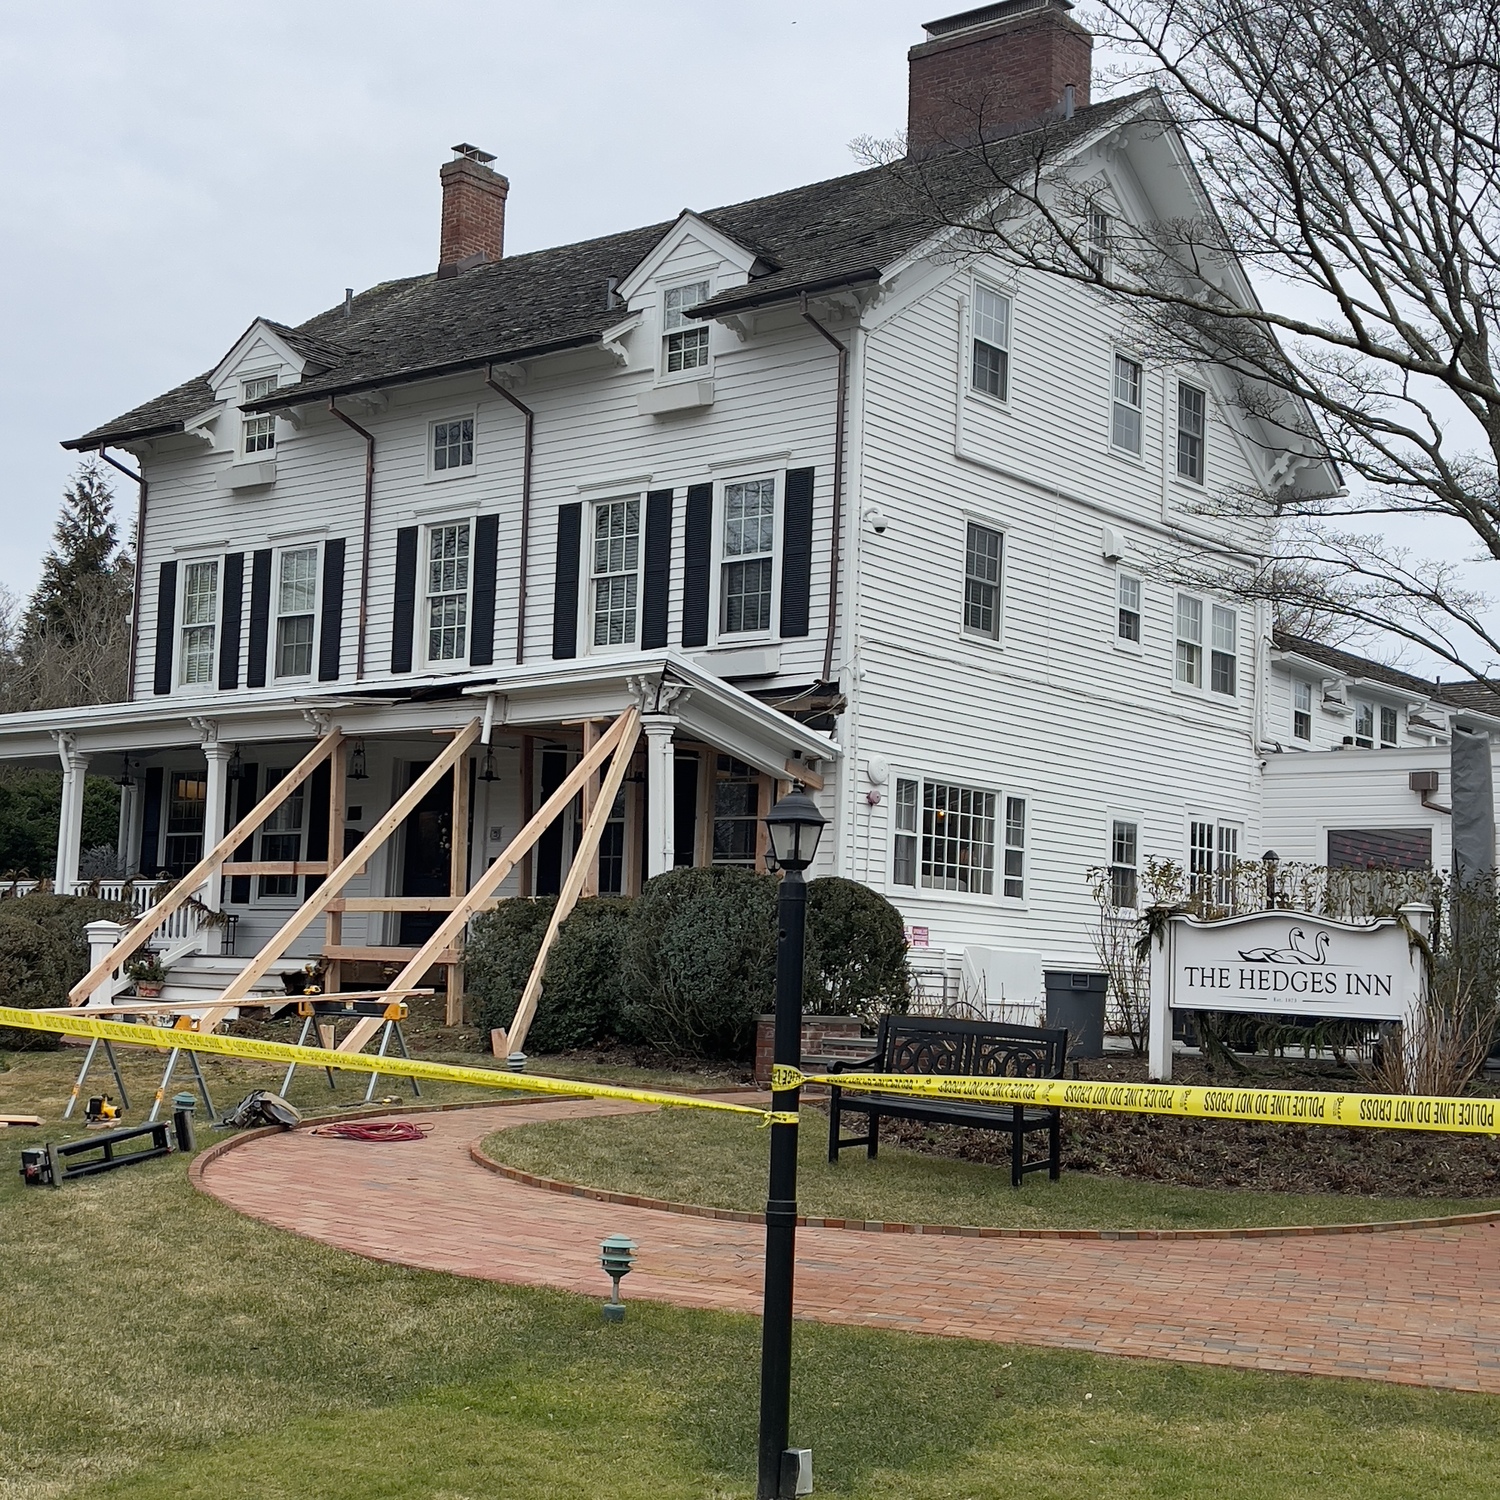 The building's front porch had to be shored up on Monday. DOUG KUNTZ